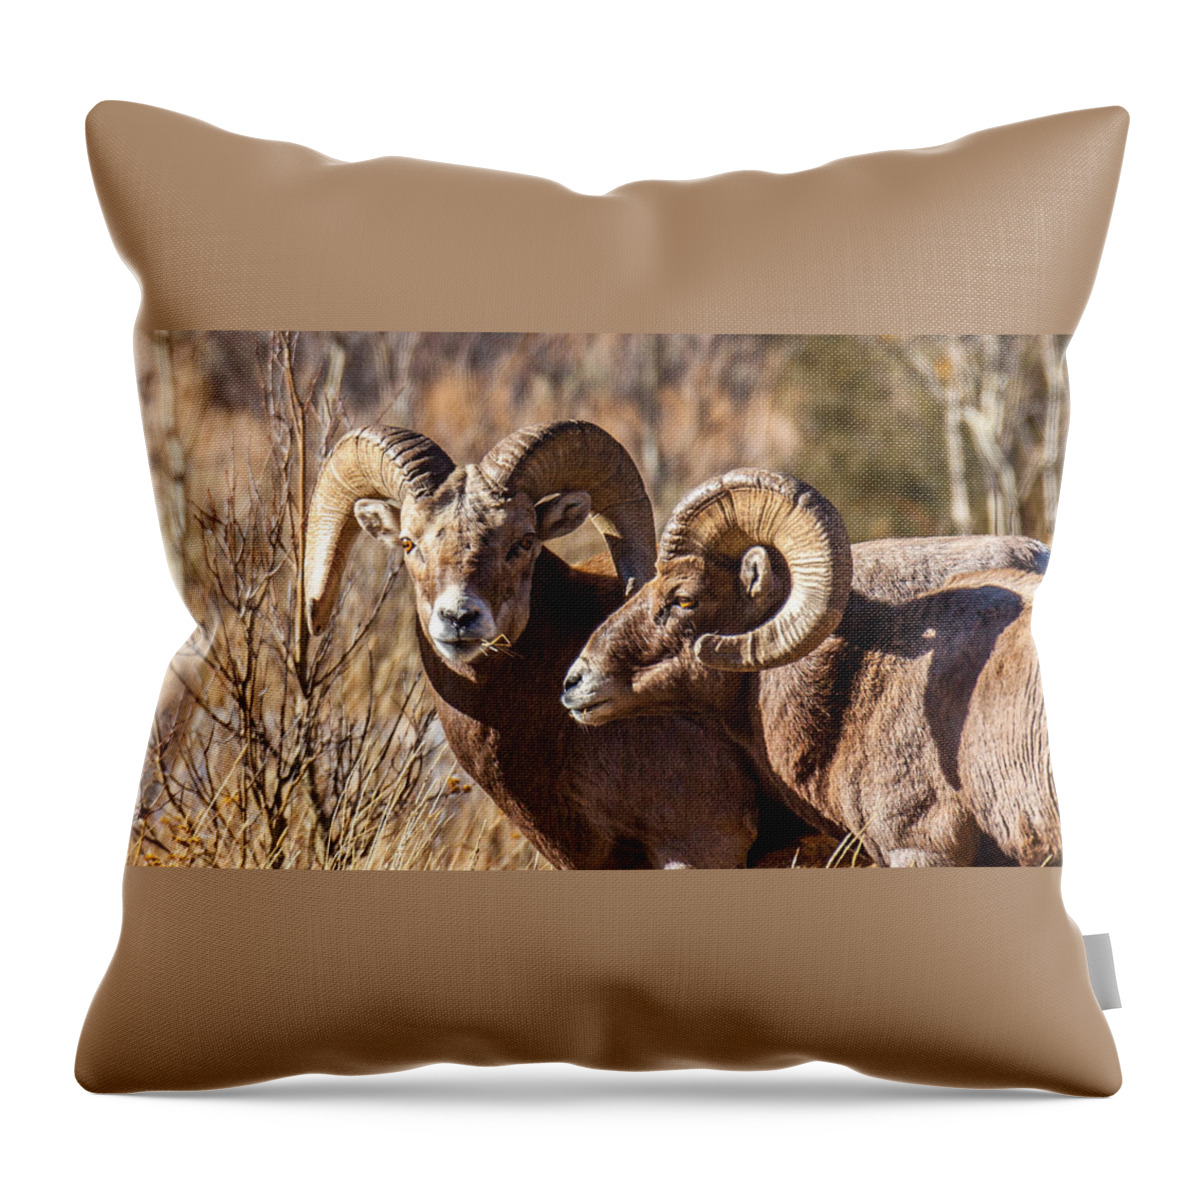 Big Horn Sheep Throw Pillow featuring the photograph Rivals by Kevin Dietrich